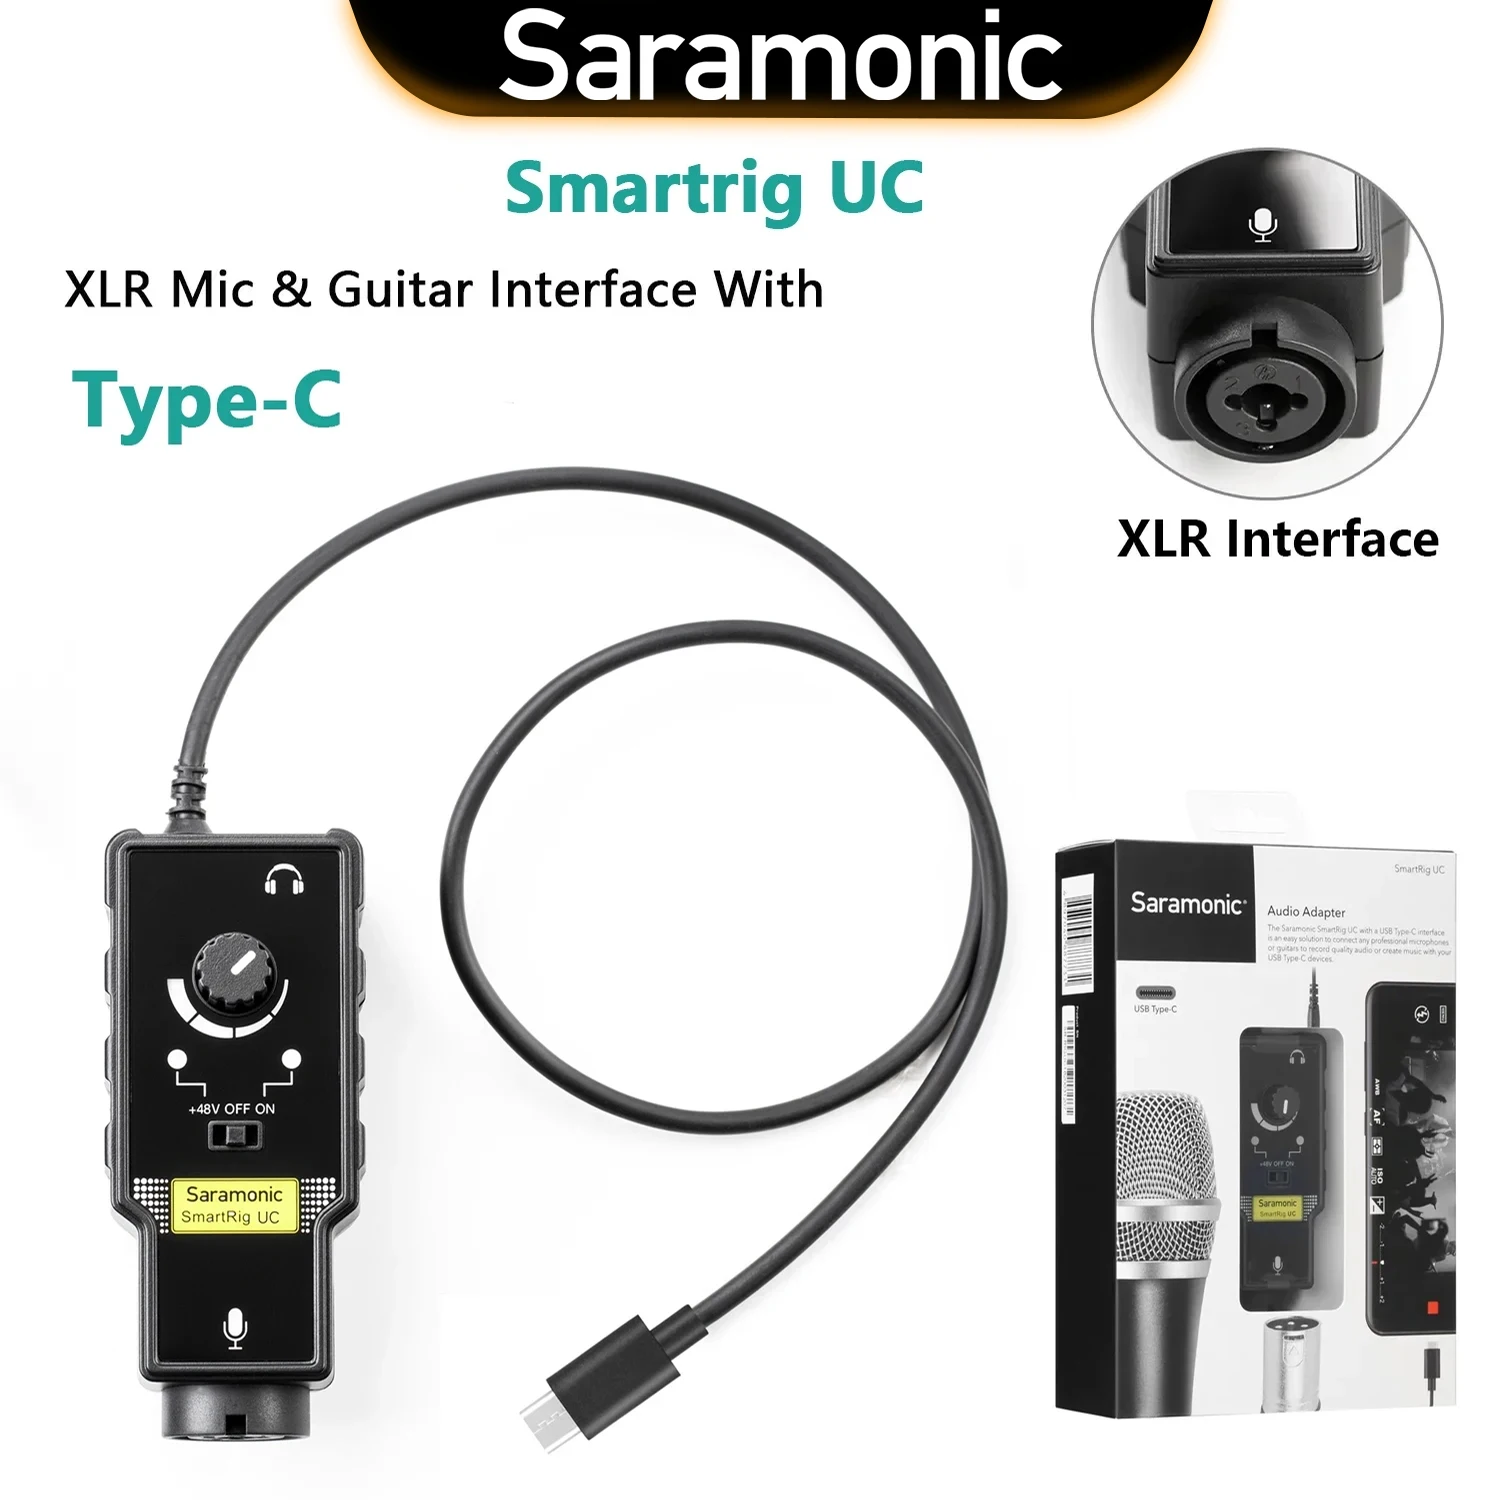 

Saramonic SmartRig UC Professional Audio Interface Preamplifier Audio Adapter Mixer for Type-C Devices Video Recording Streaming